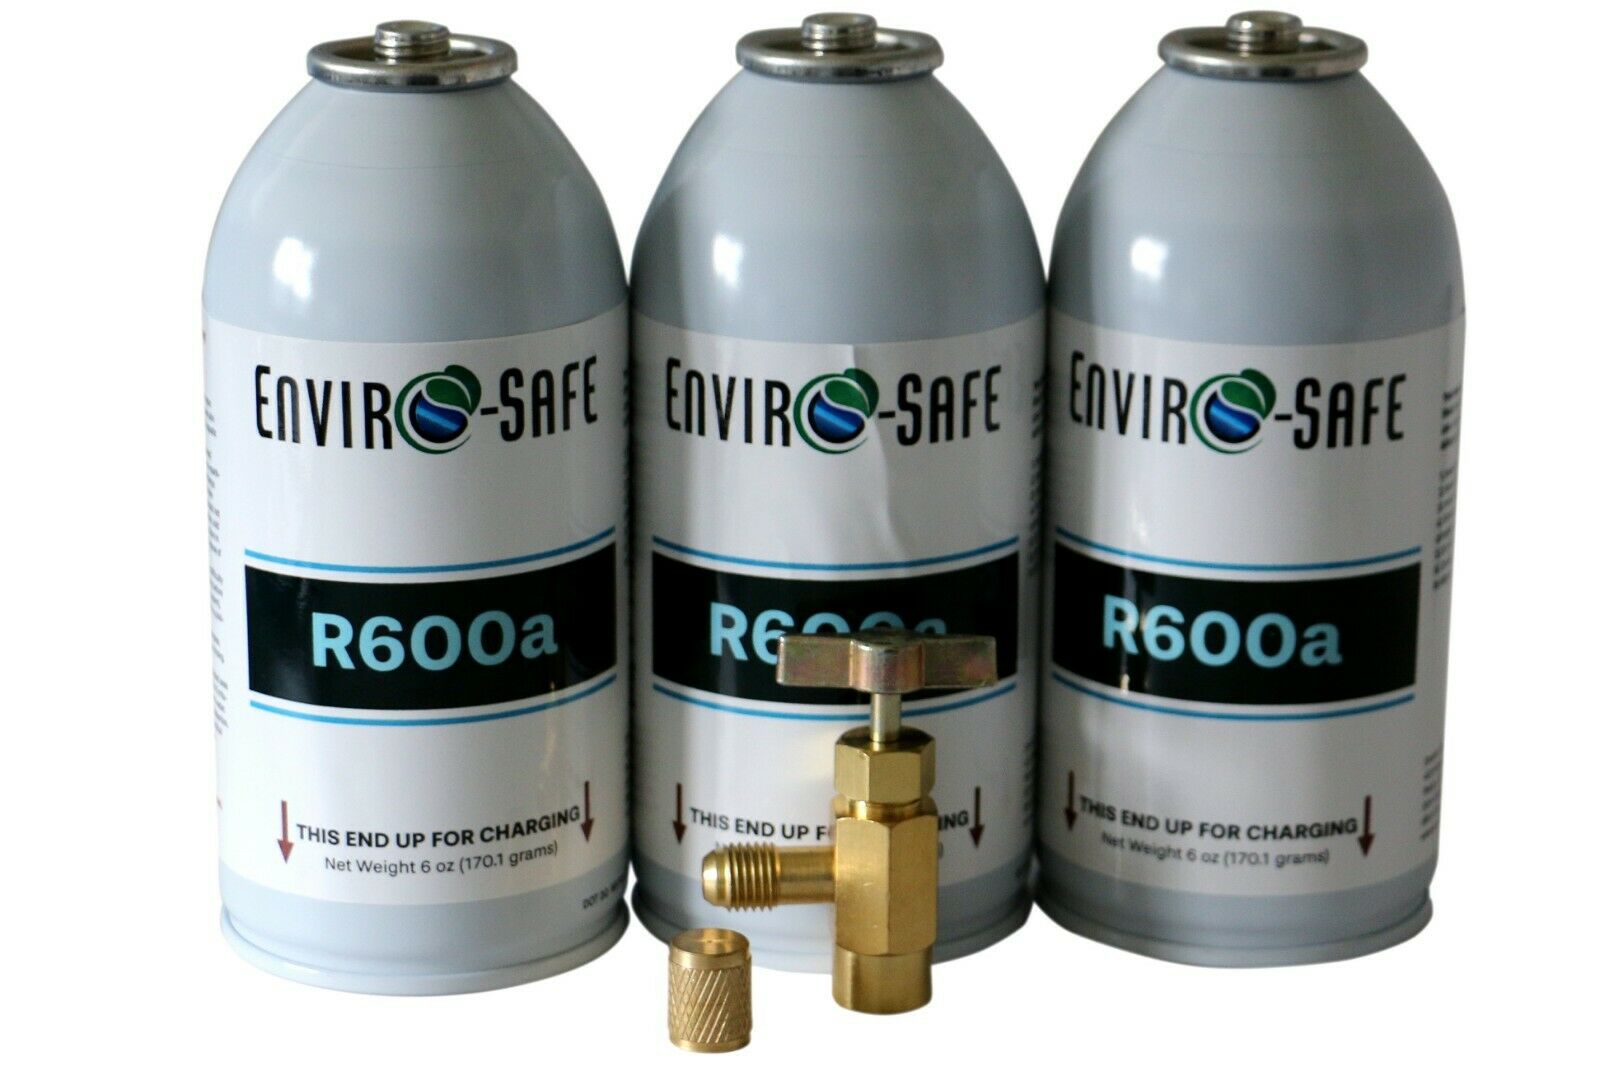 R-600a Modern Refrigerant, 3 Convenient 6 Oz Cans With Top Tap And Cap #8060